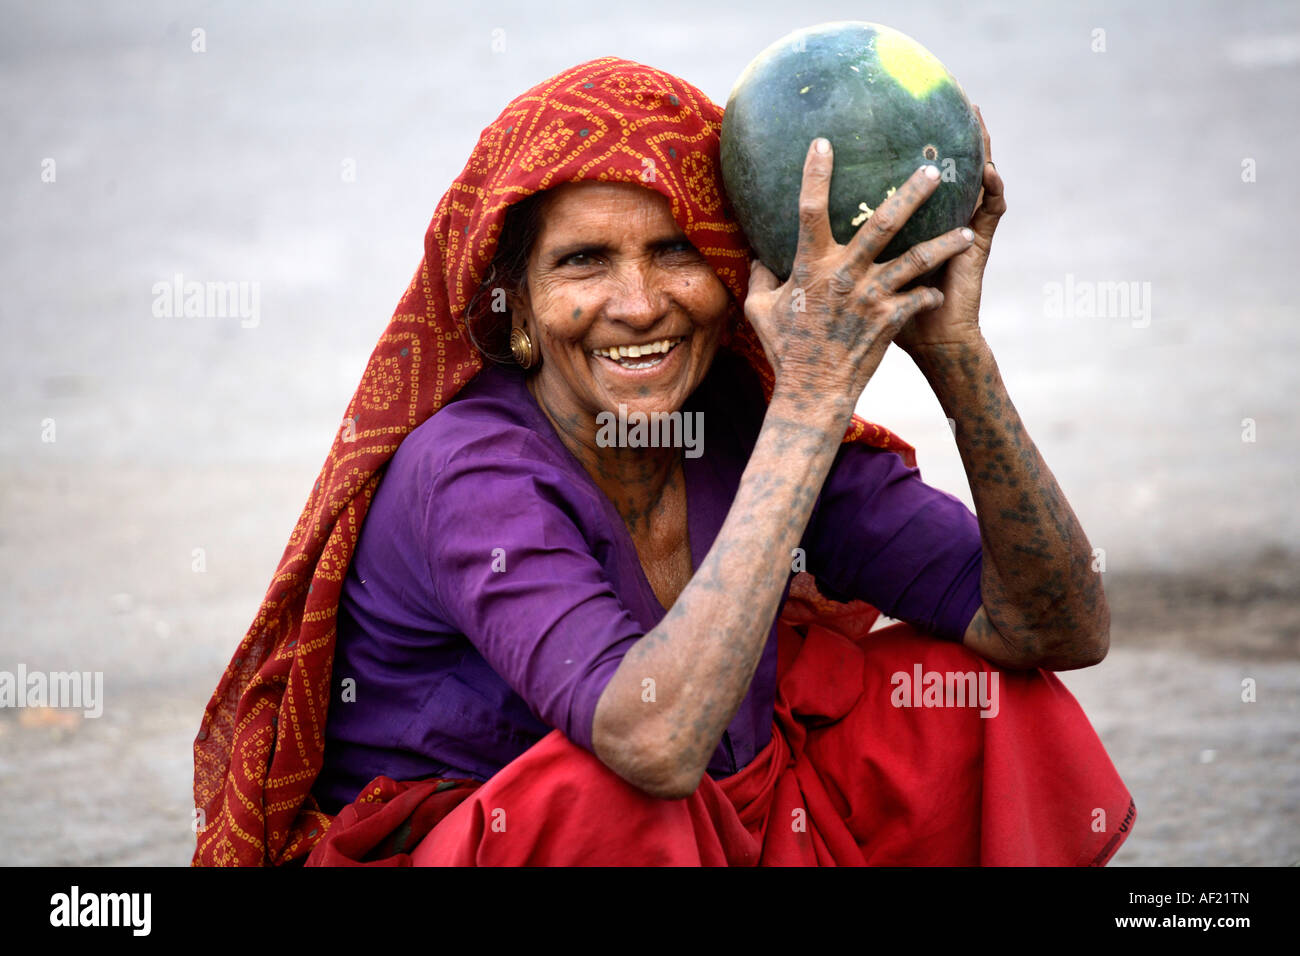 Rabari tribal female with neck, arm and hand tattoos selling water melons at market stall, Una, Gujarat, India Stock Photo